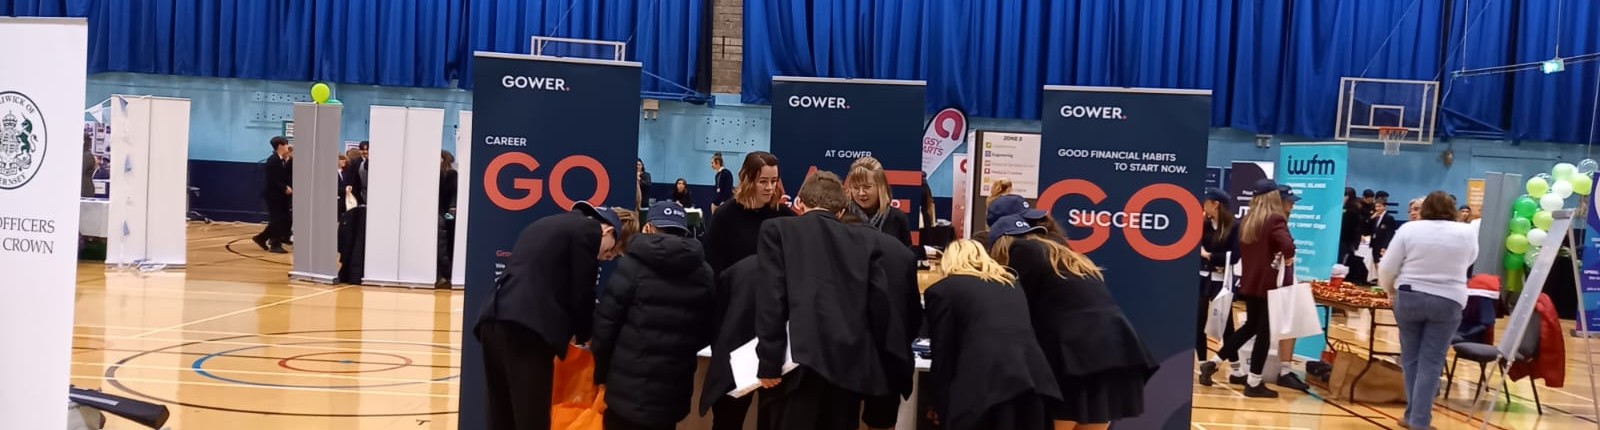 First time Careers Show exhibit for Gower 